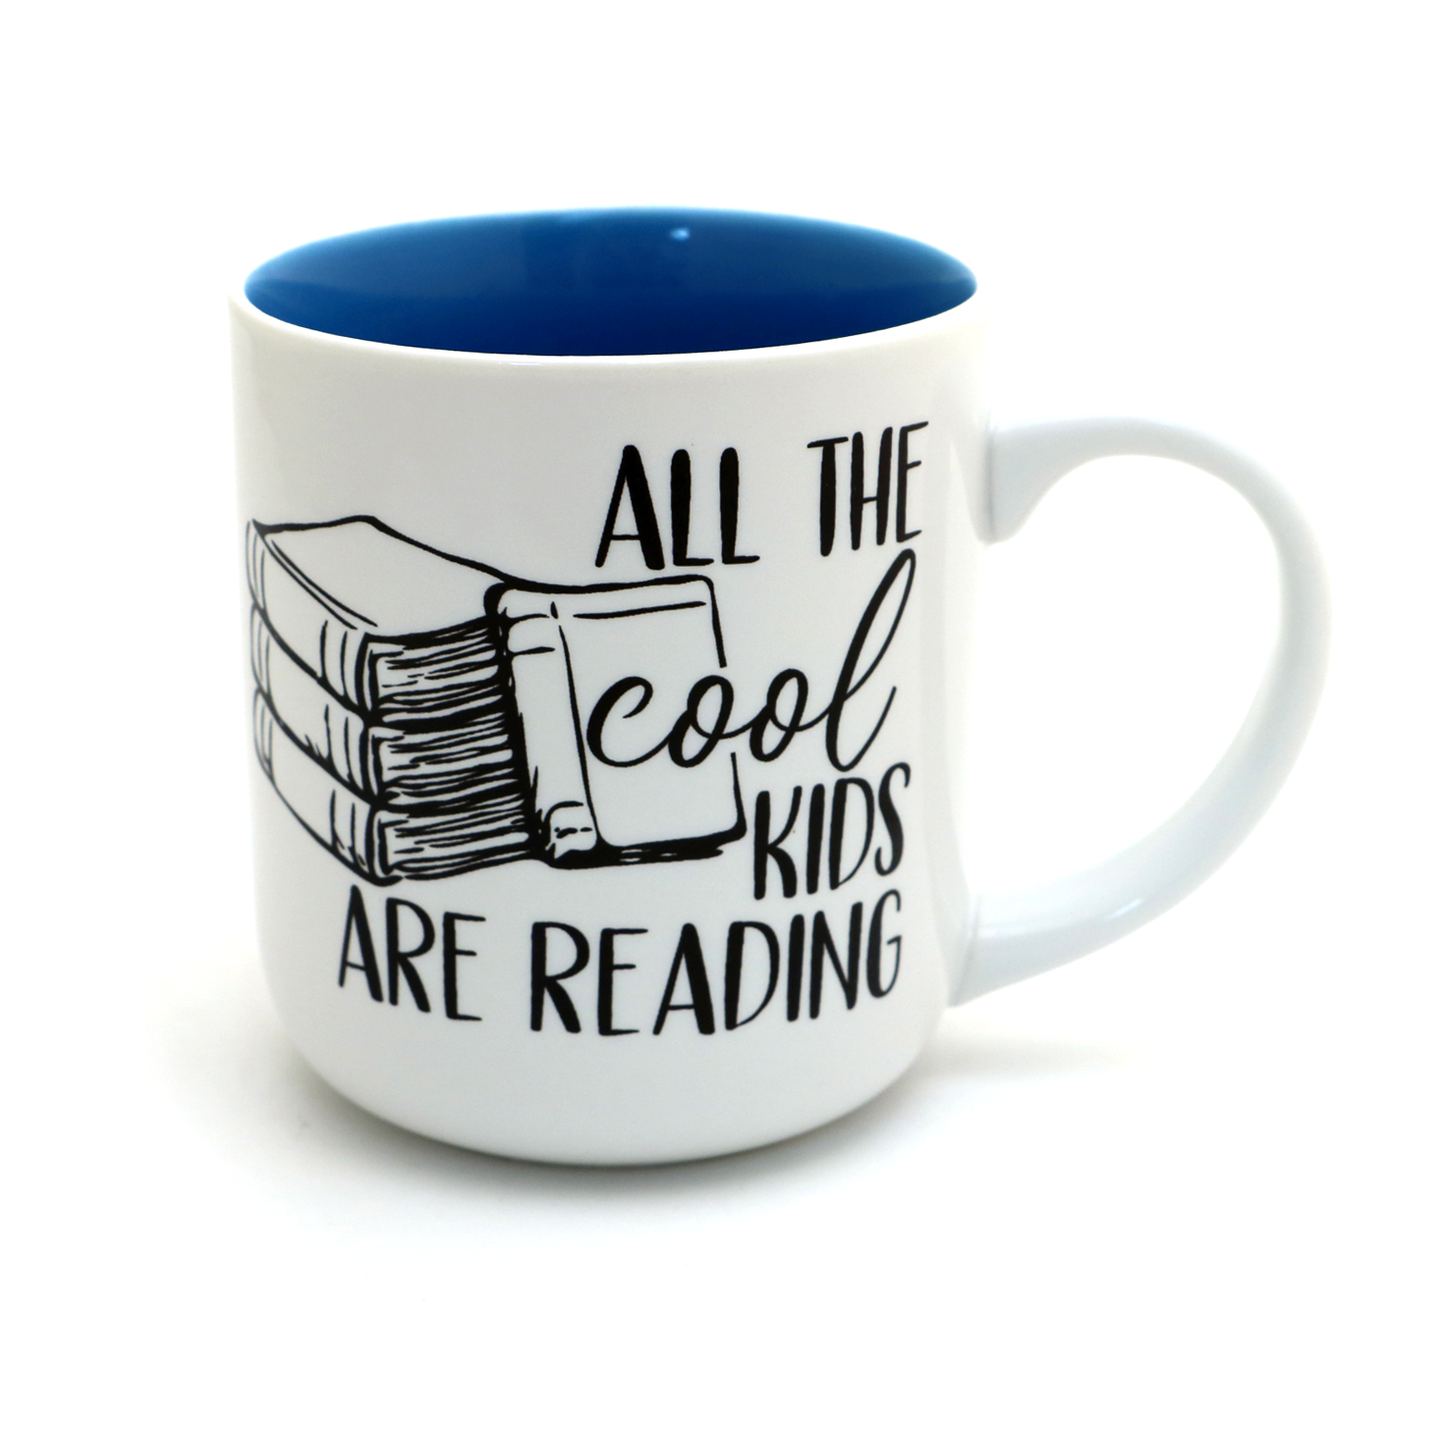 Mug-003: Cool Kids are Reading, Banned Books